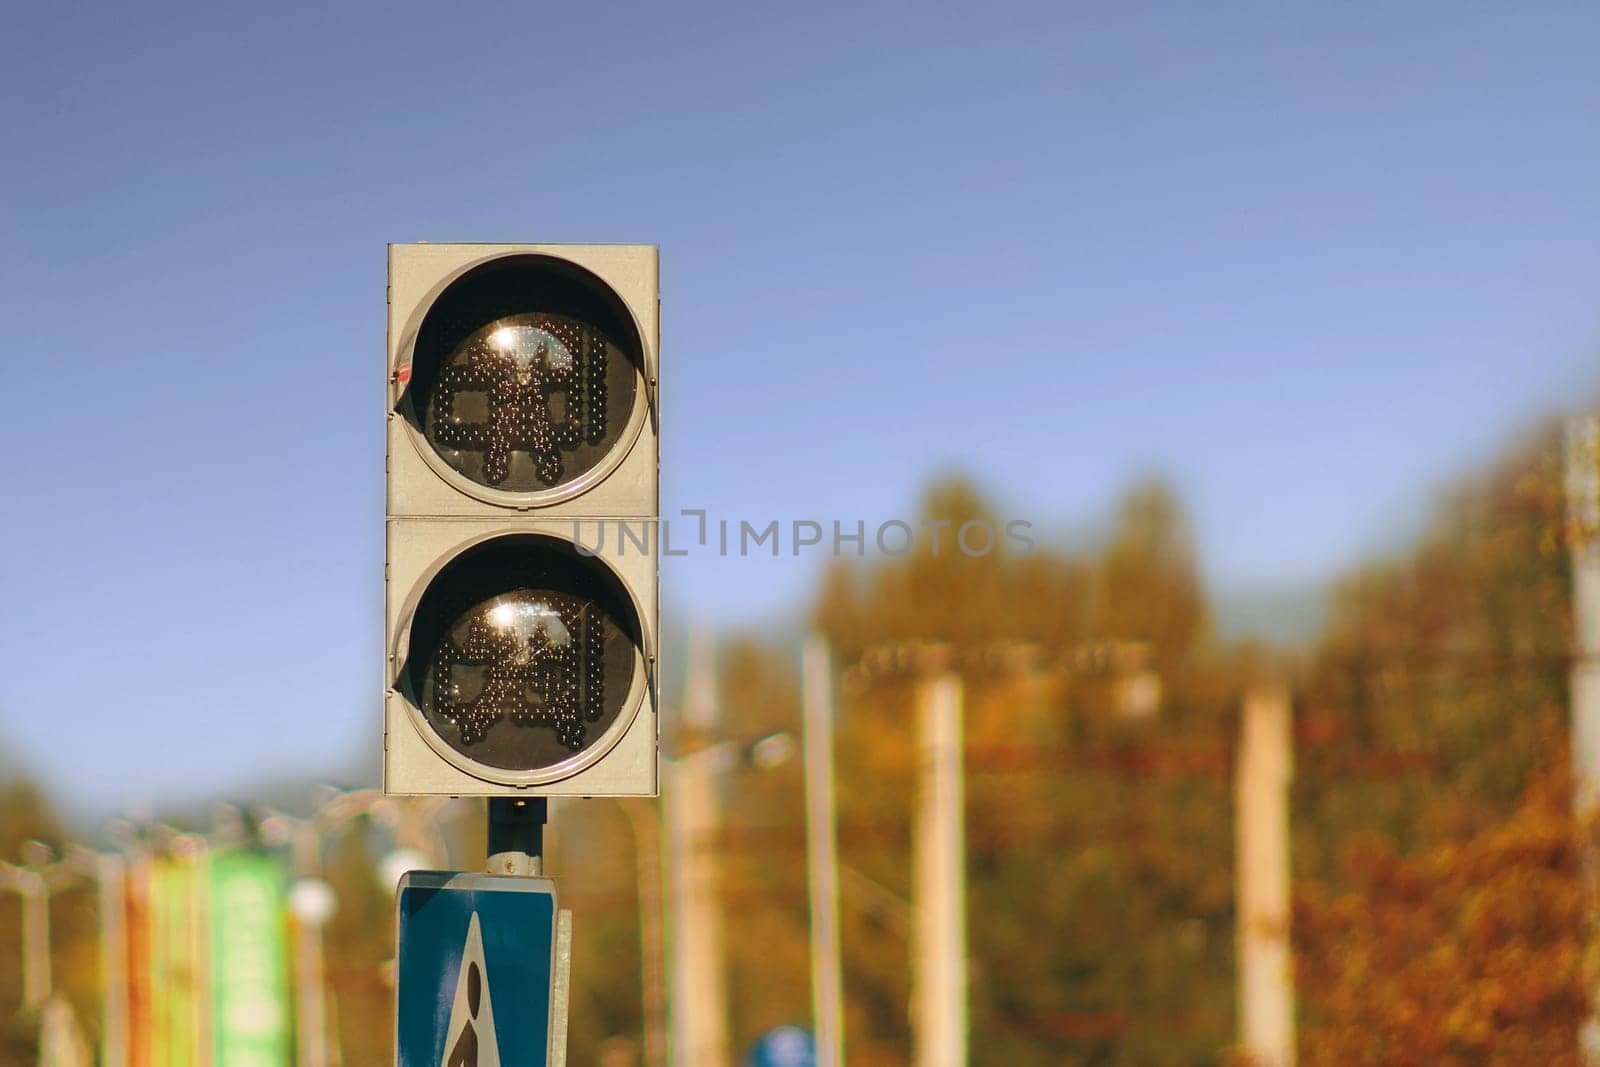 Not working traffic light by savconstantine